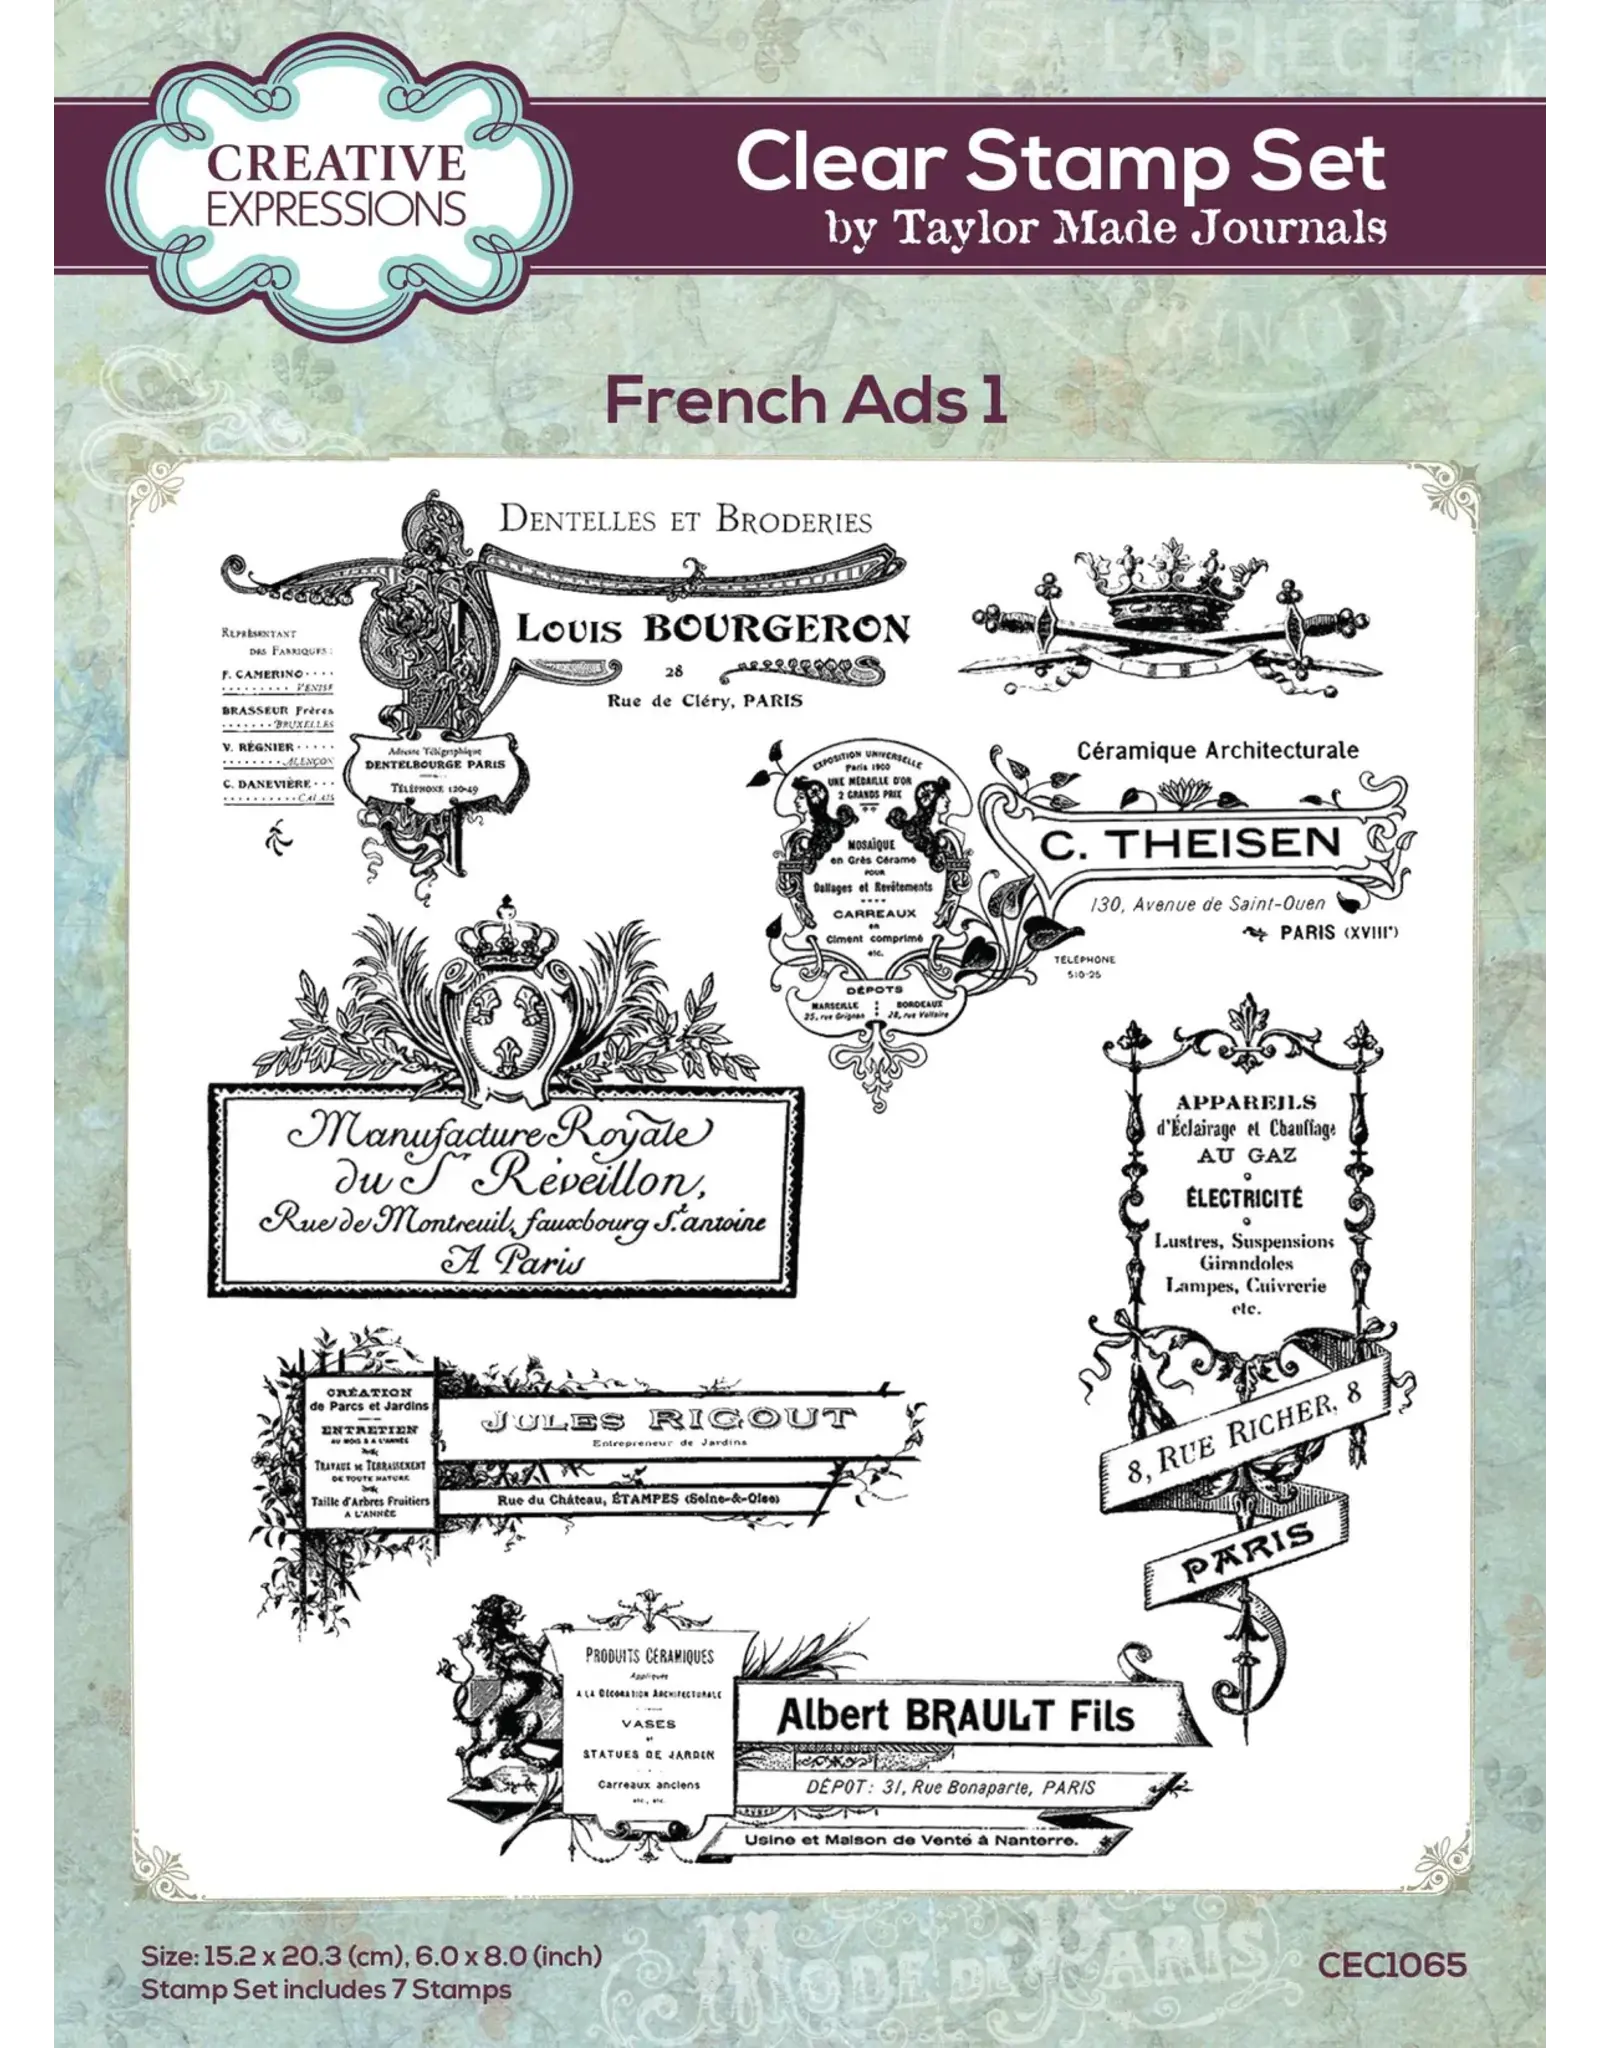 CREATIVE EXPRESSIONS CREATIVE EXPRESSIONS TAYLOR MADE JOURNALS FRENCH ADS 1 6x8 CLEAR STAMP SET